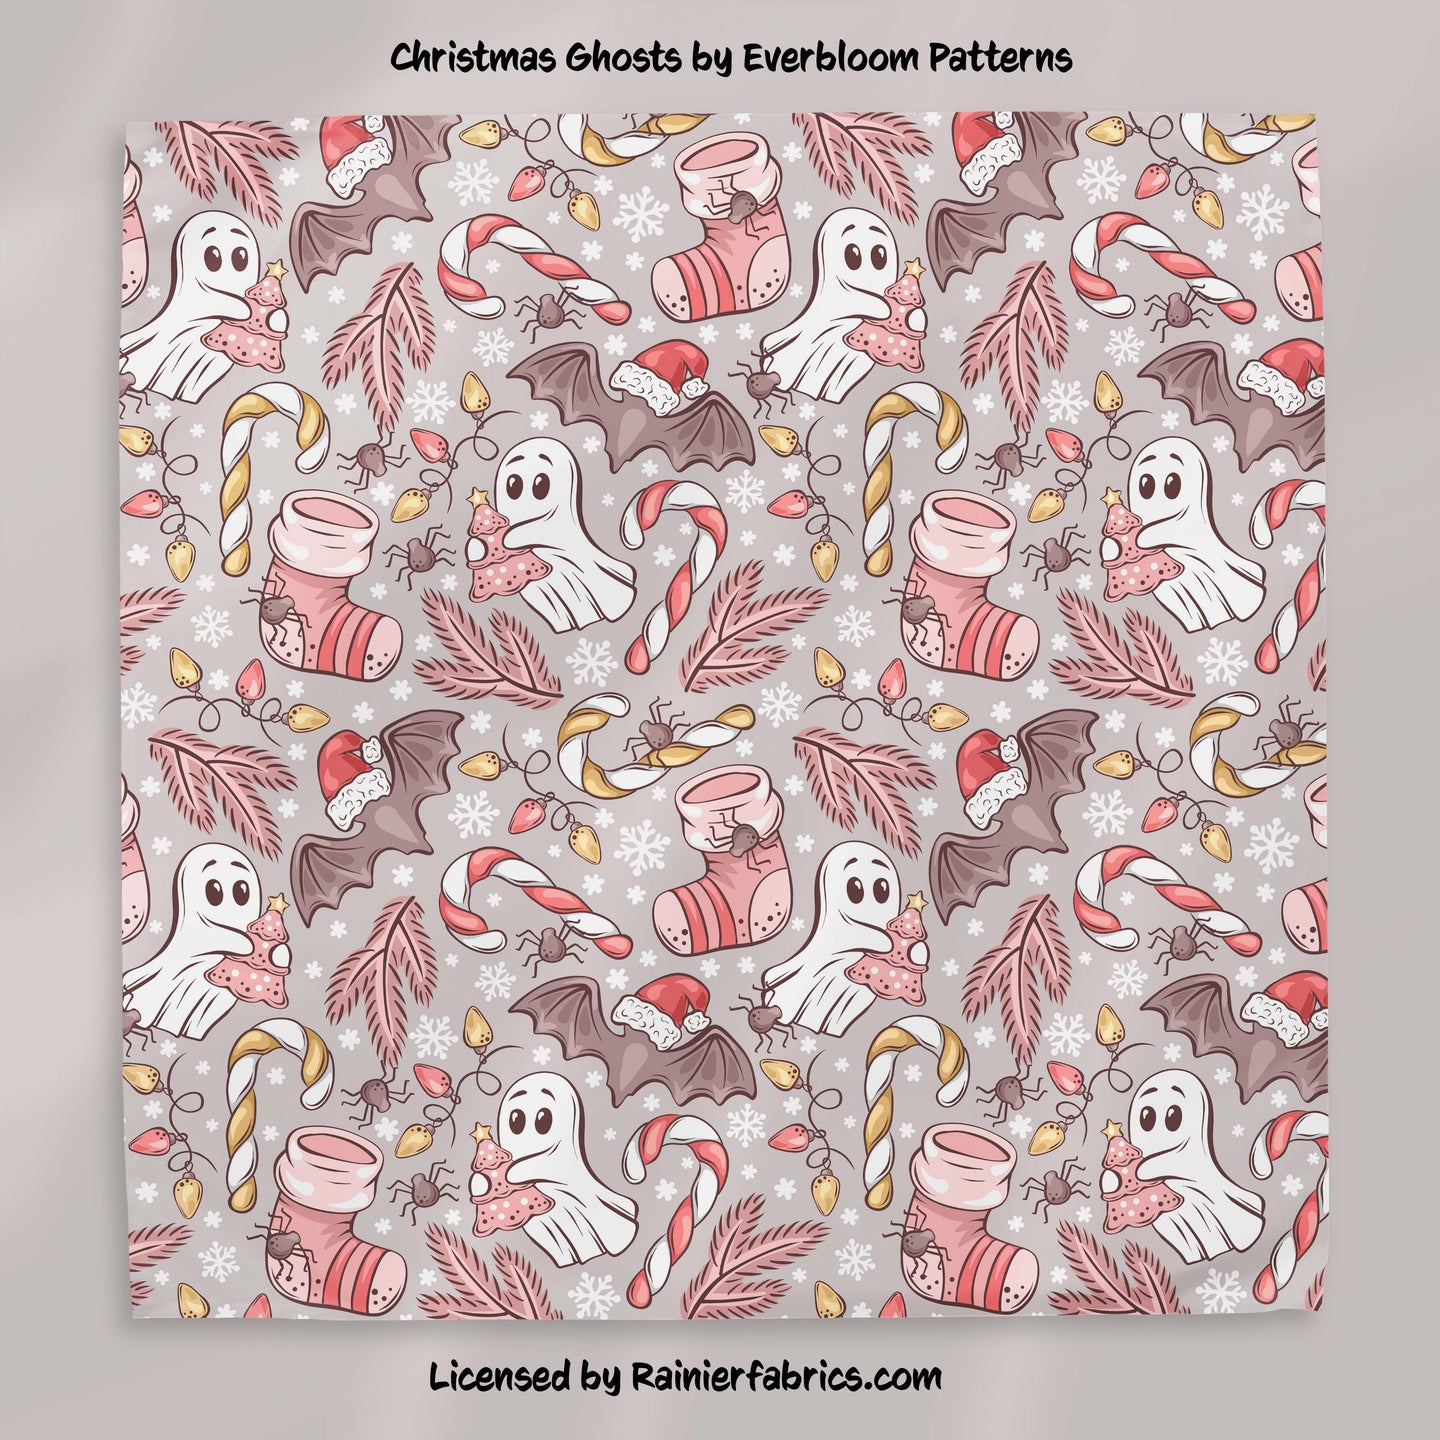 Christmas Ghosts by Everbloom - 2-5 day TAT - Order by 1/2 yard; Blankets and towels available too